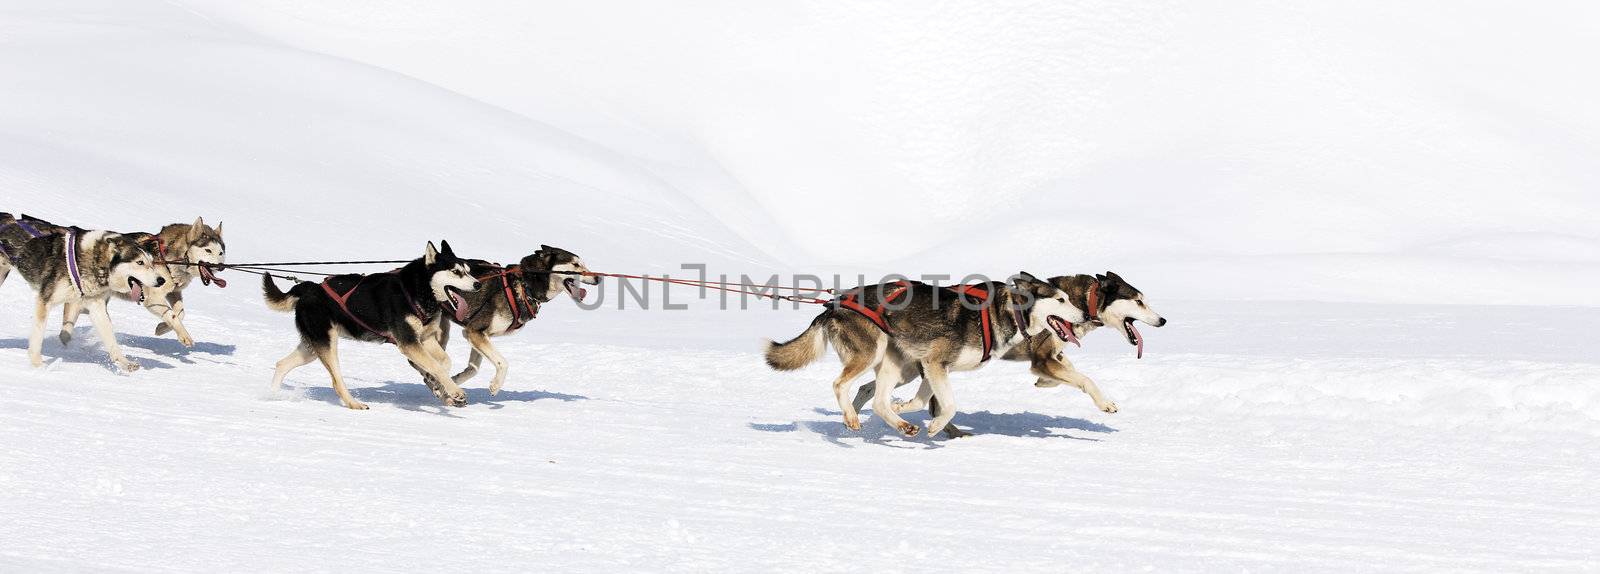 panoramic dog race by vwalakte